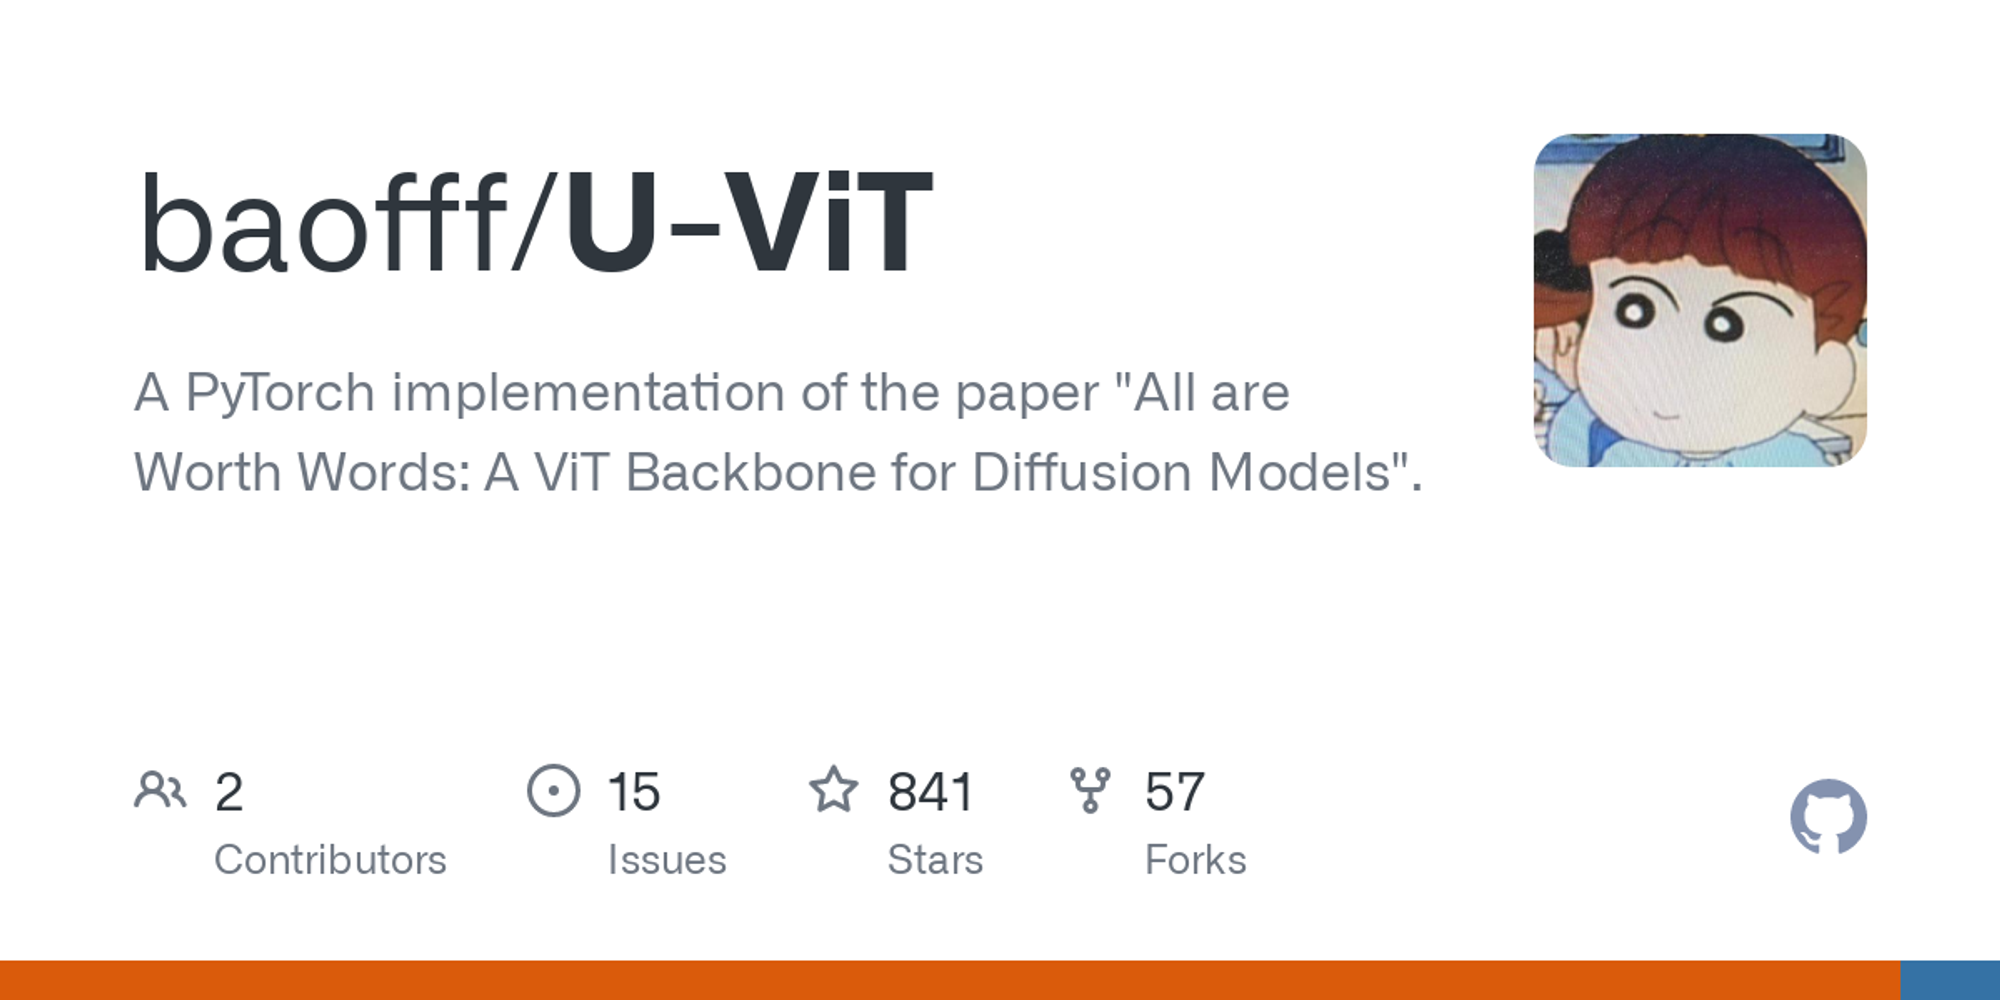 GitHub - baofff/U-ViT: A PyTorch implementation of the paper "All are Worth Words: A ViT Backbone for Diffusion Models".